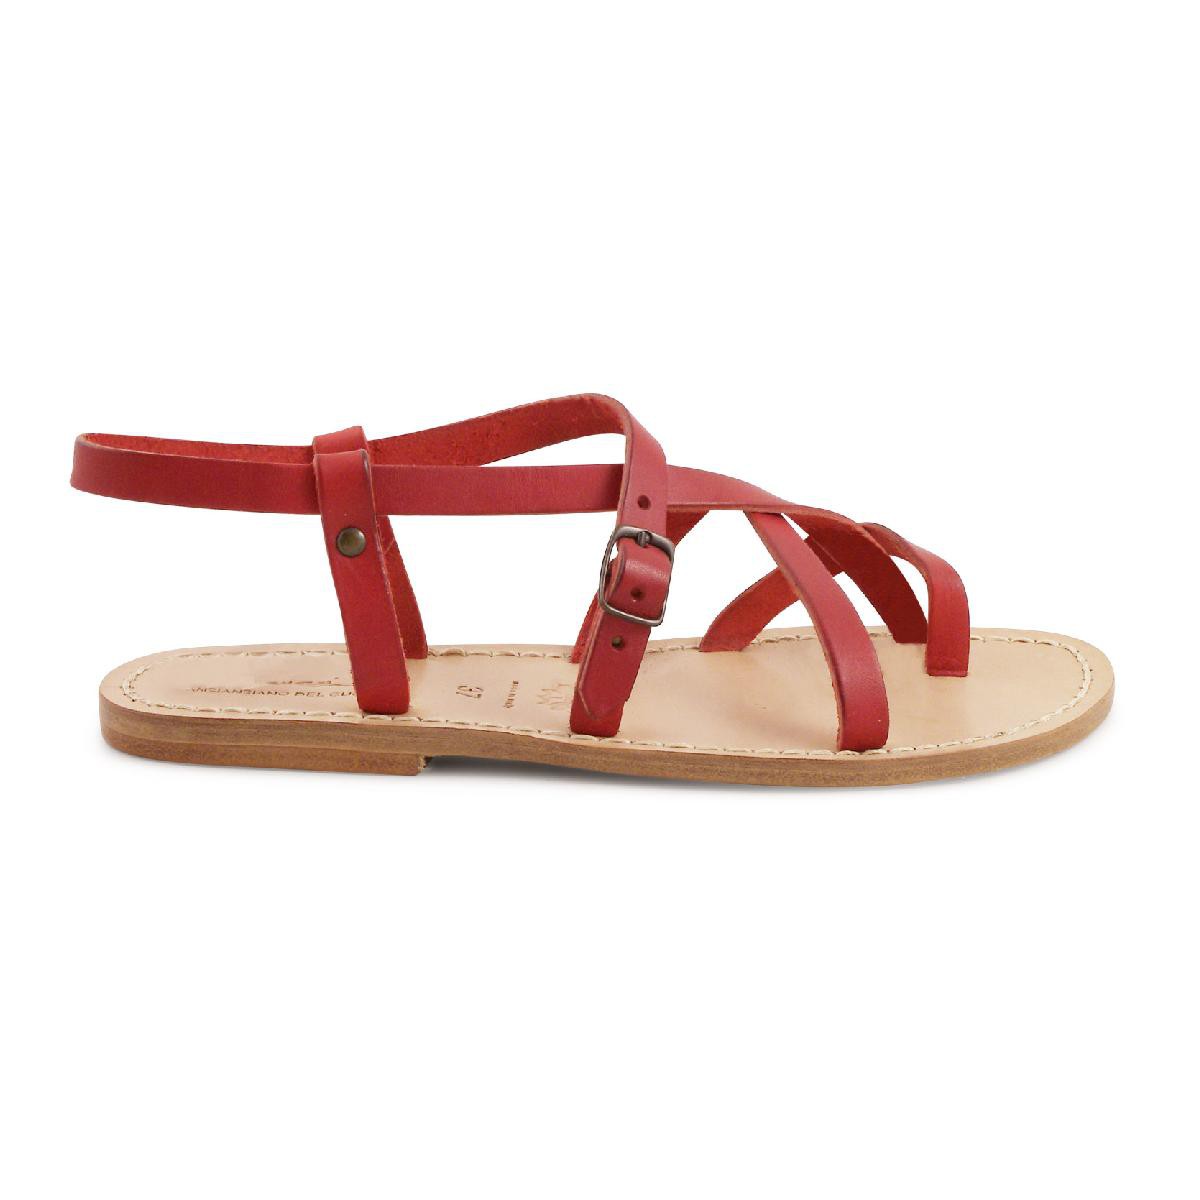 Red leather flat sandals for women handmade in Italy | Gianluca - The ...